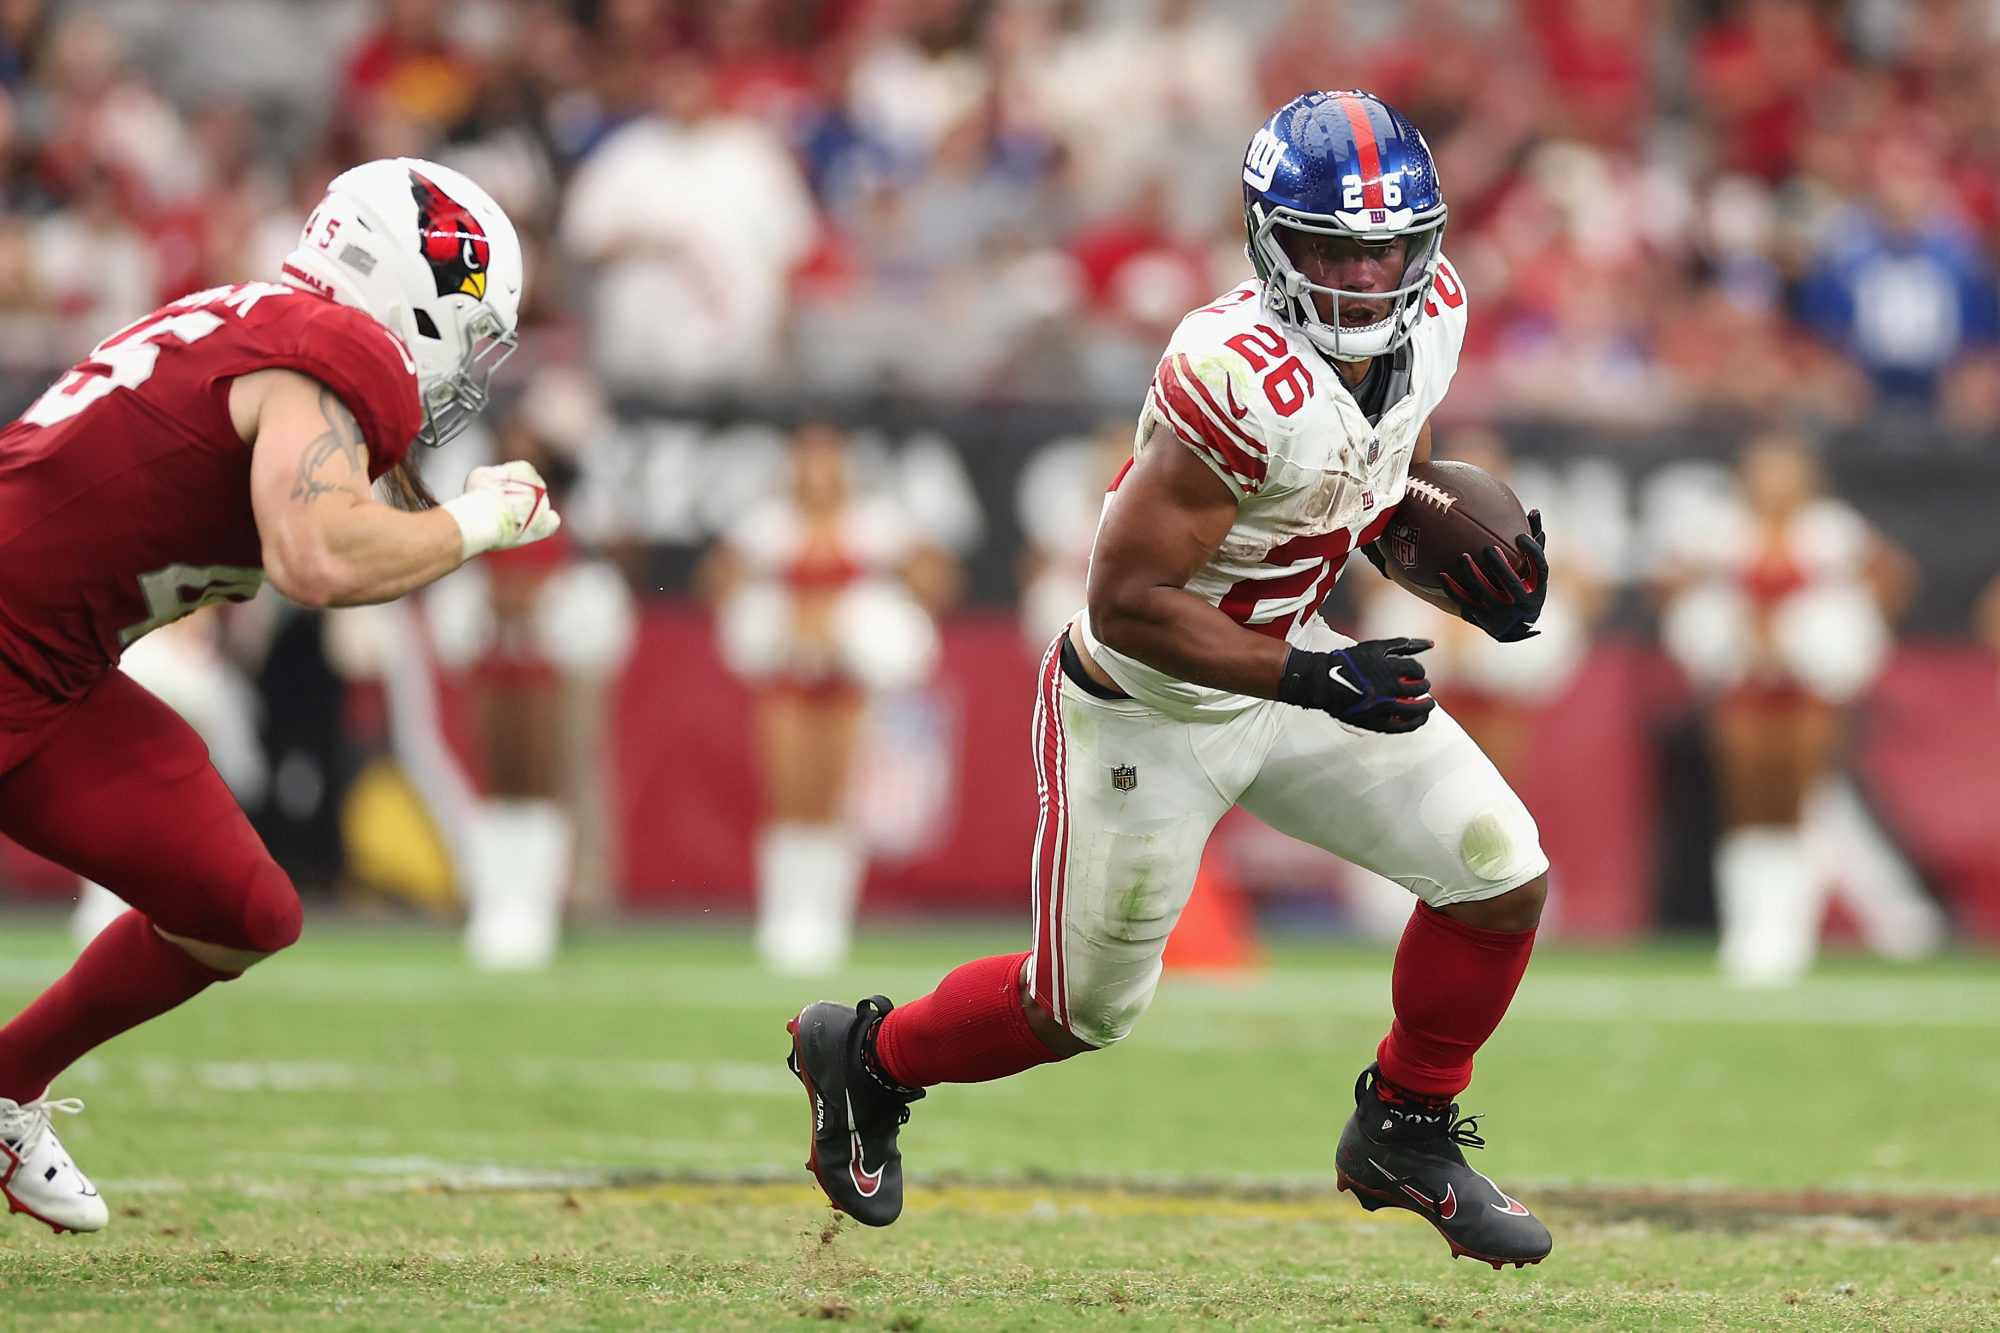 Giants-49ers opening odds: Is a blowout imminent? - Big Blue View